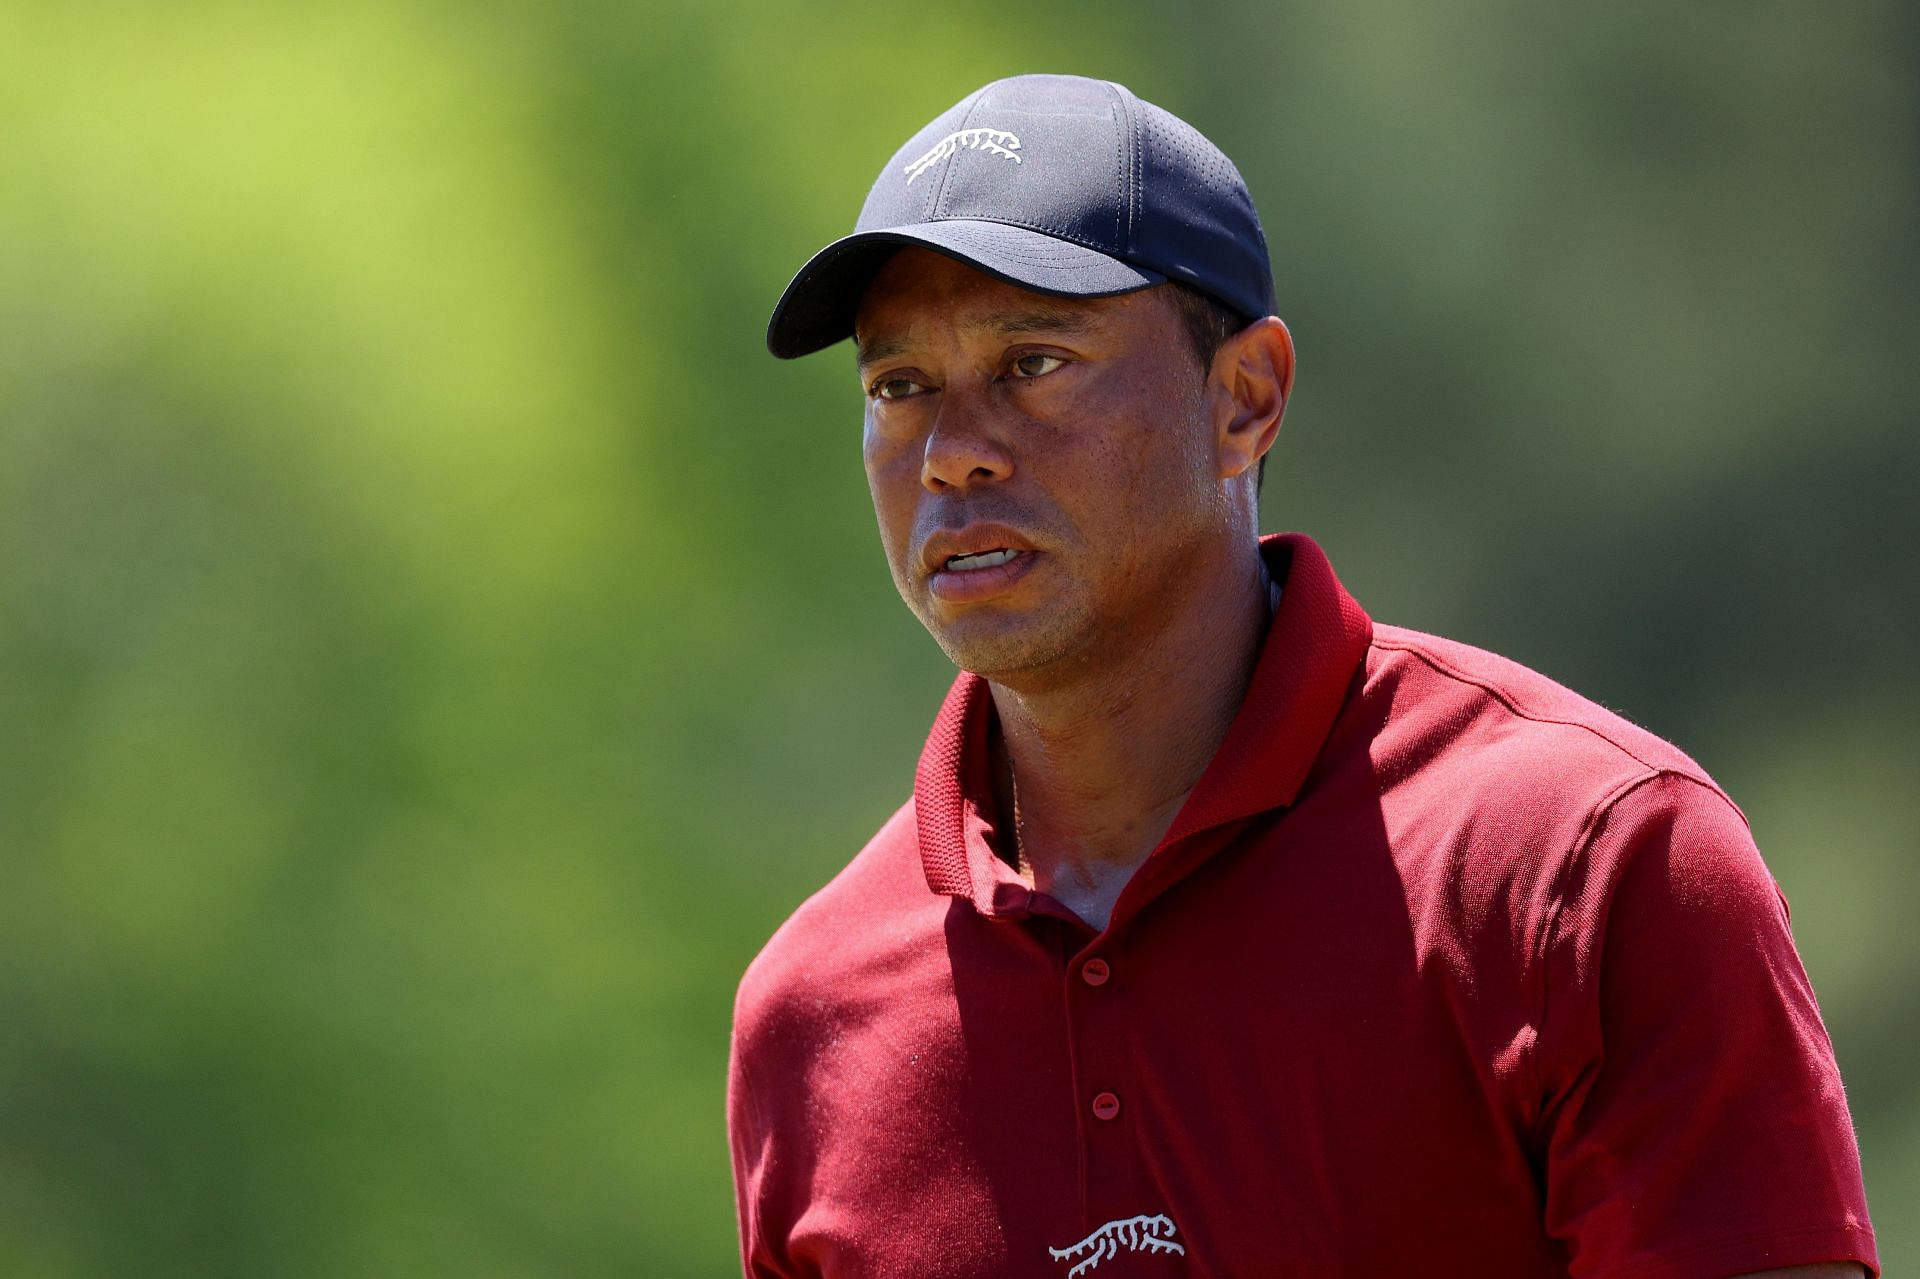 Tiger Woods is not playing this weekend